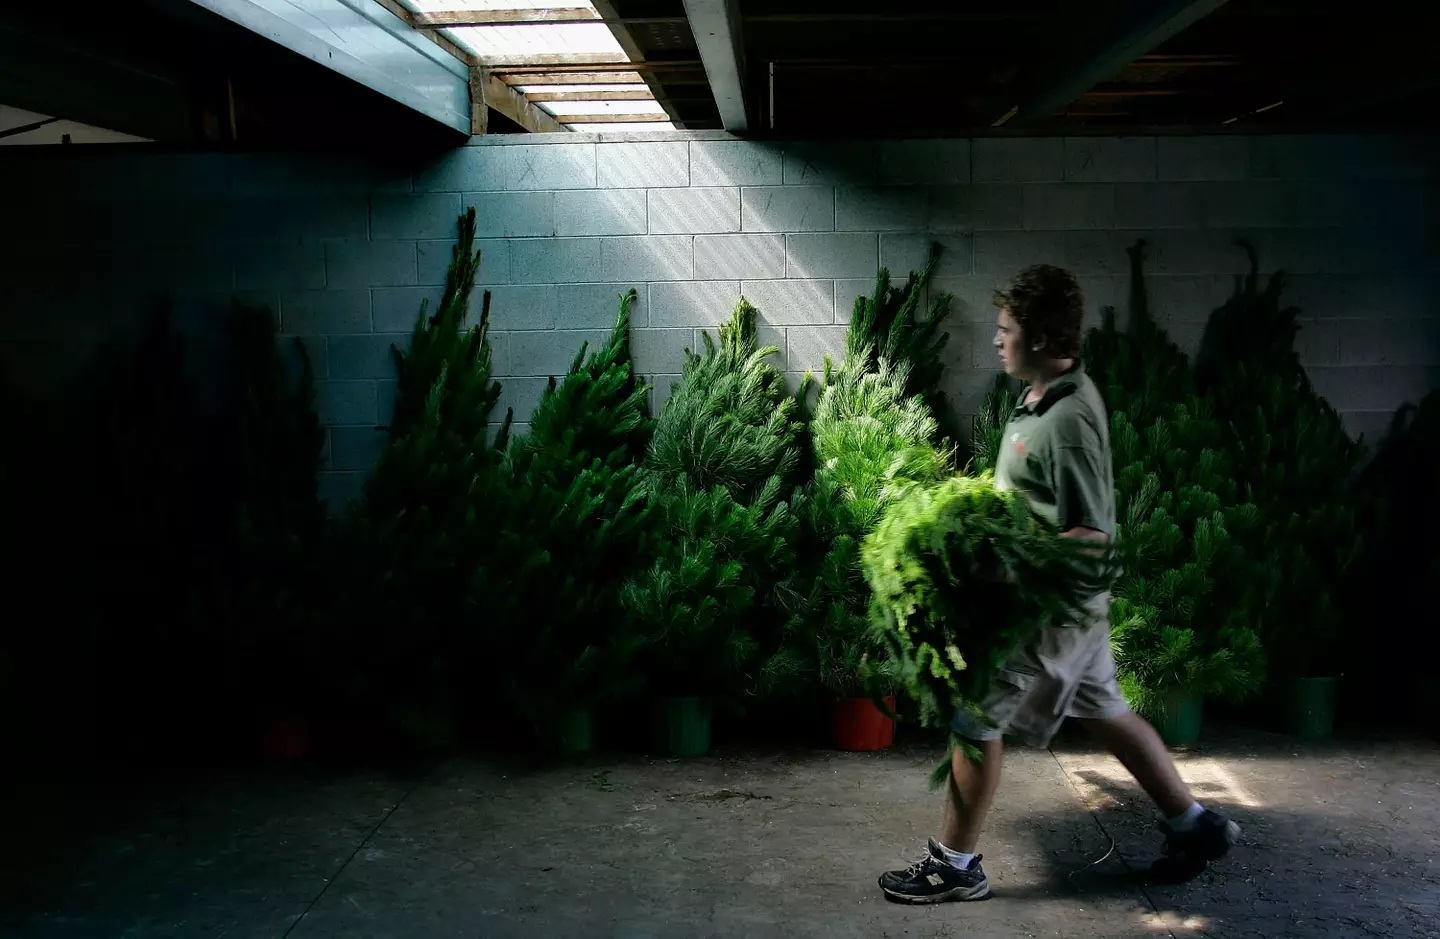 It's nearly that time of year to figure out how to carry home your tree.